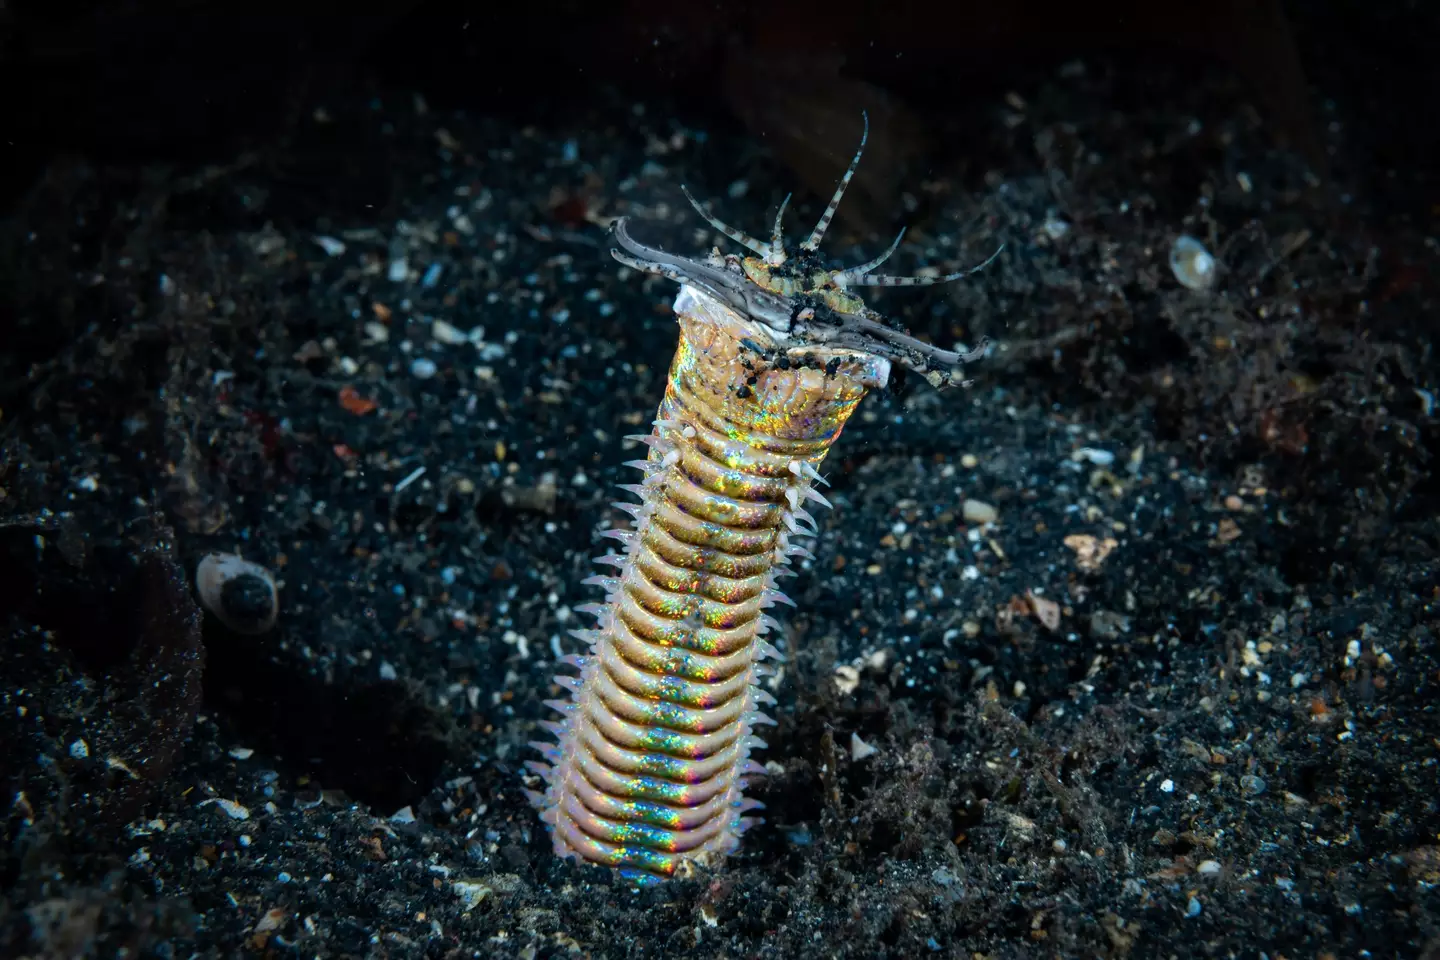 Bobbit Worms are covered in venomous bristles which can cause permanent numbness in humans.